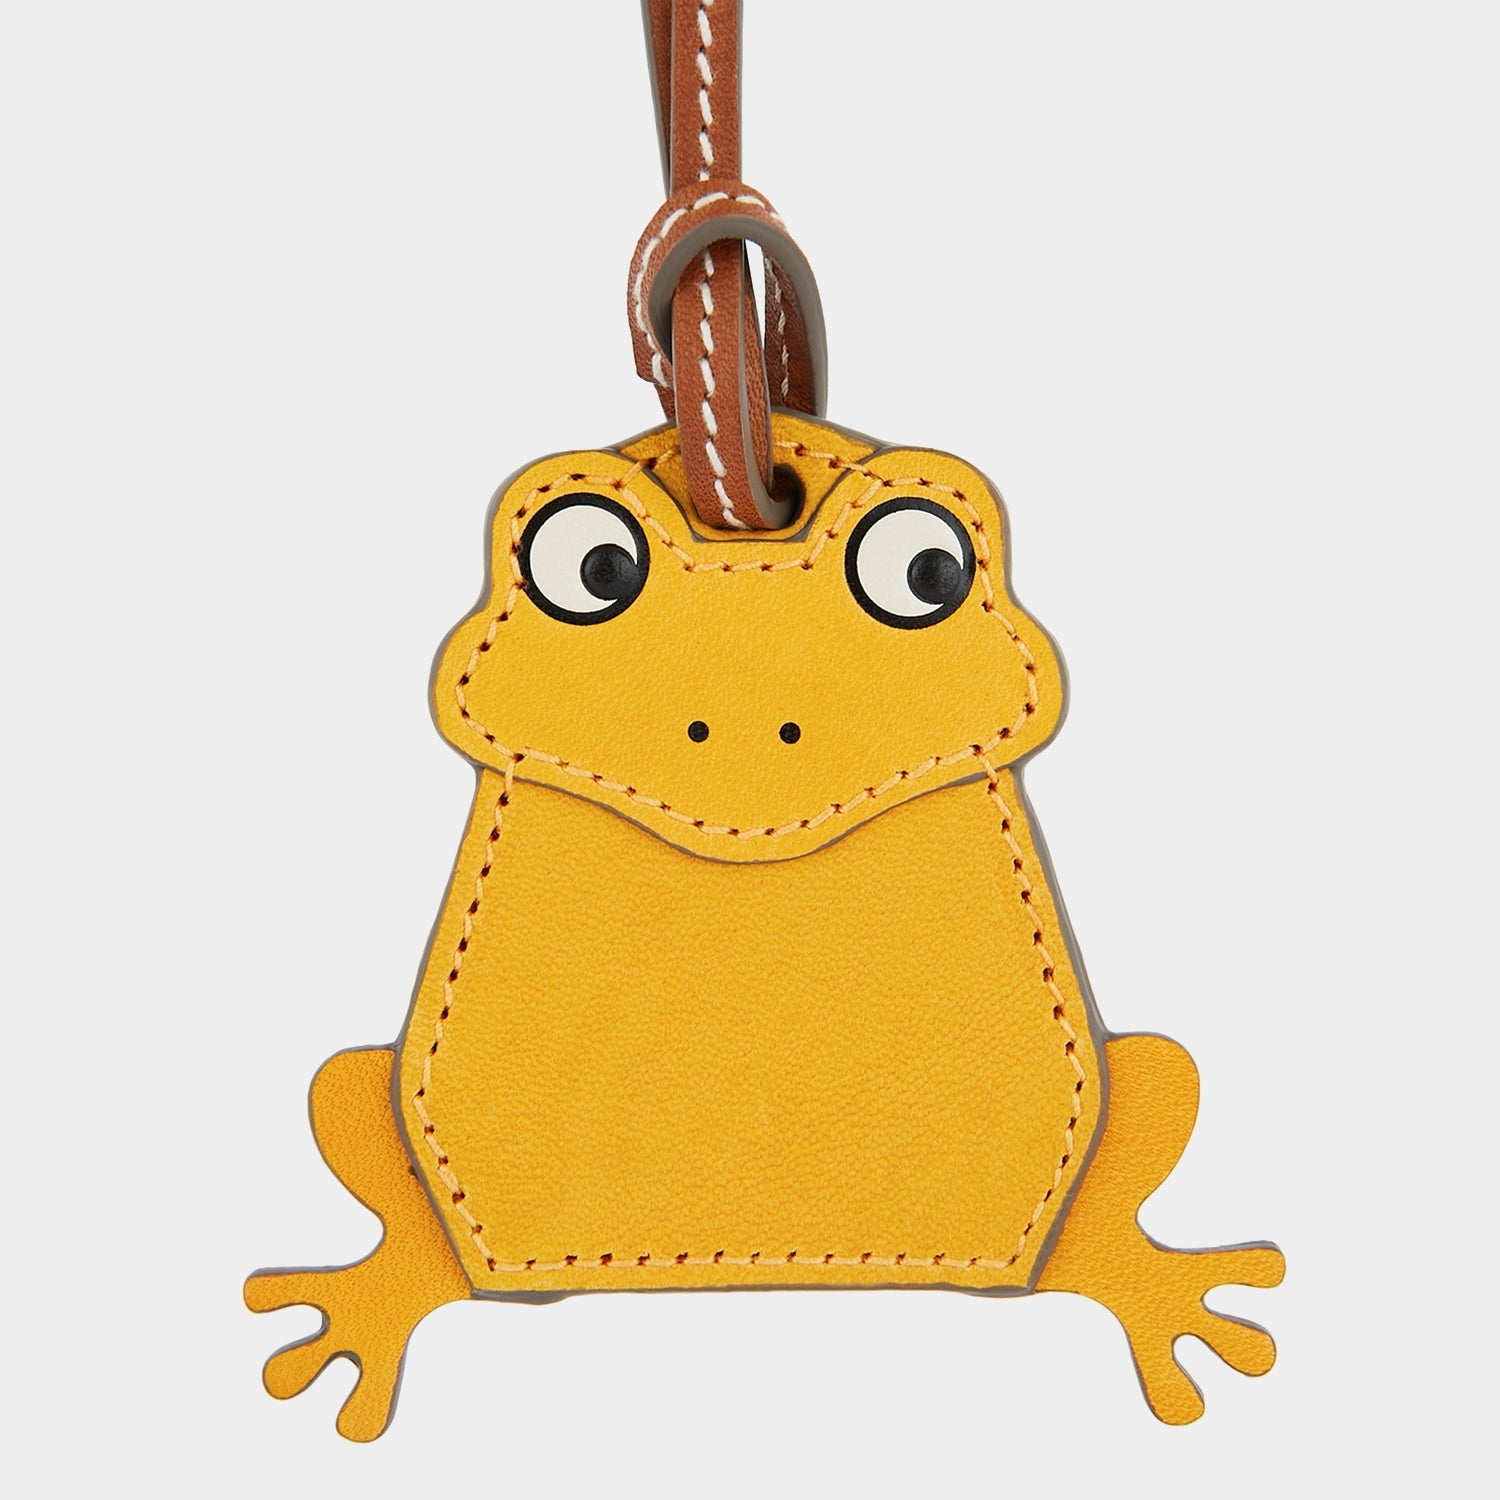 Return to Nature Frog Charm -

                  
                    Compostable Leather in Honey -
                  

                  Anya Hindmarch EU
